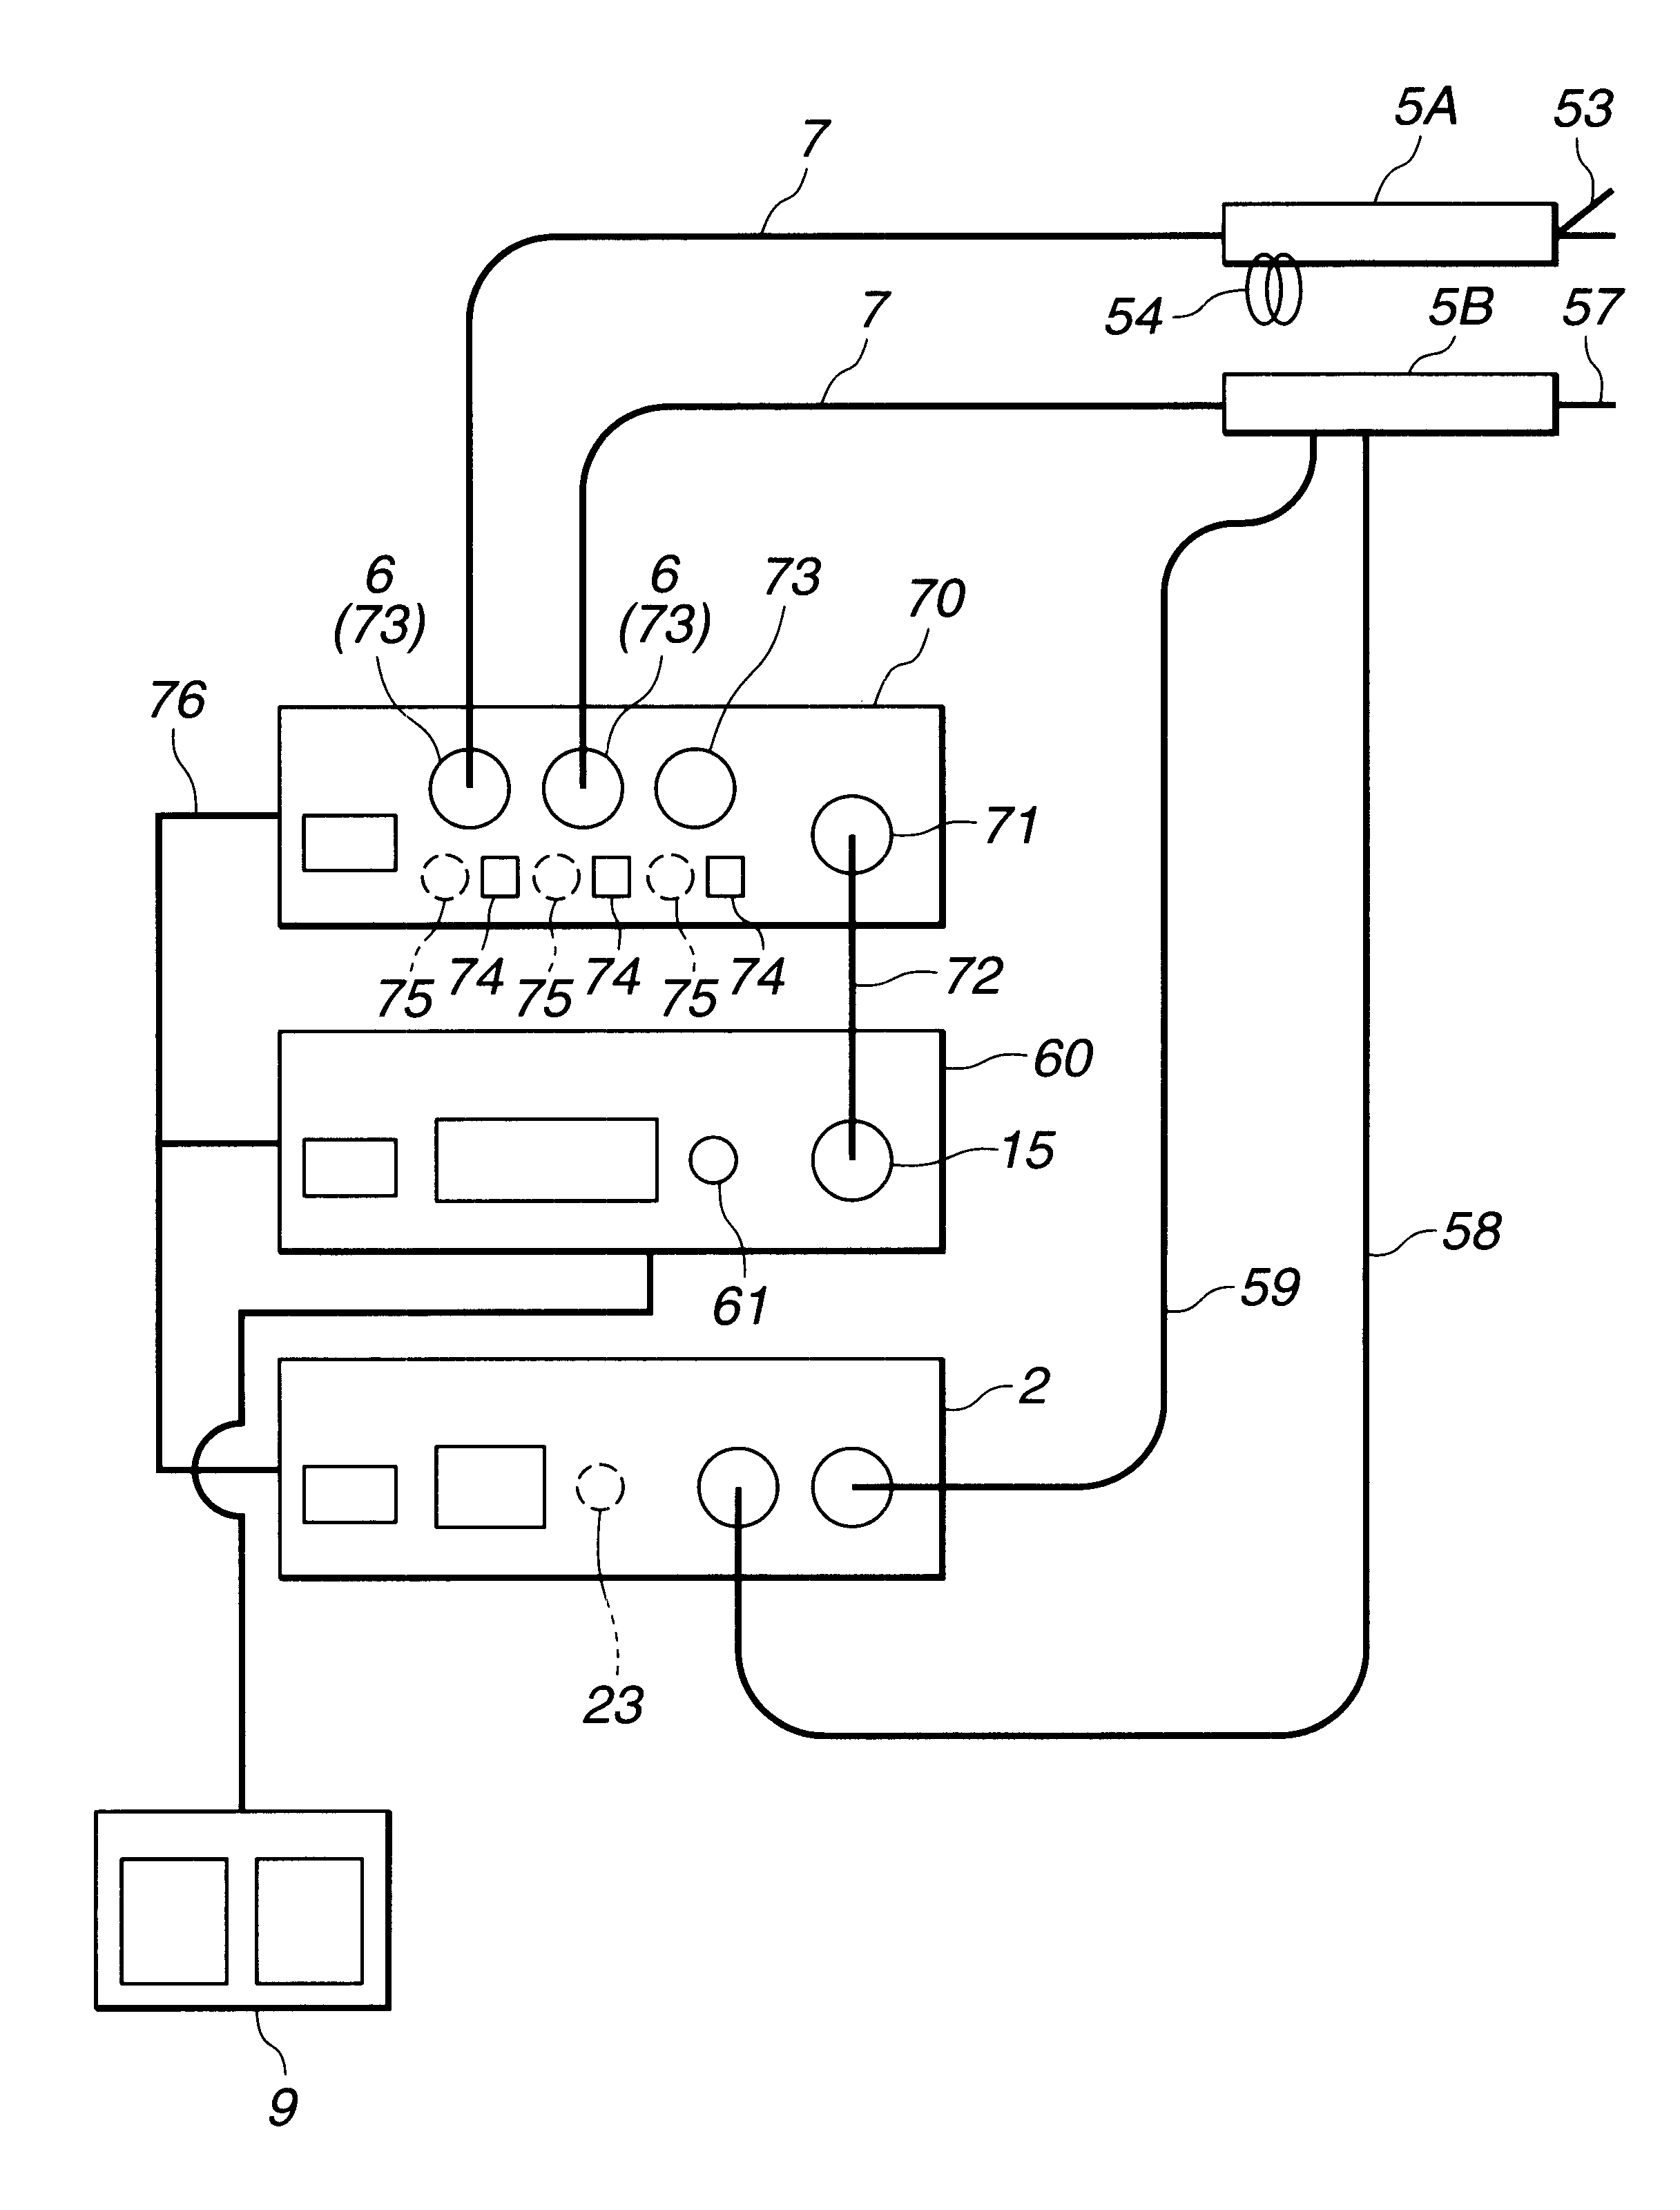 Electric treatment system